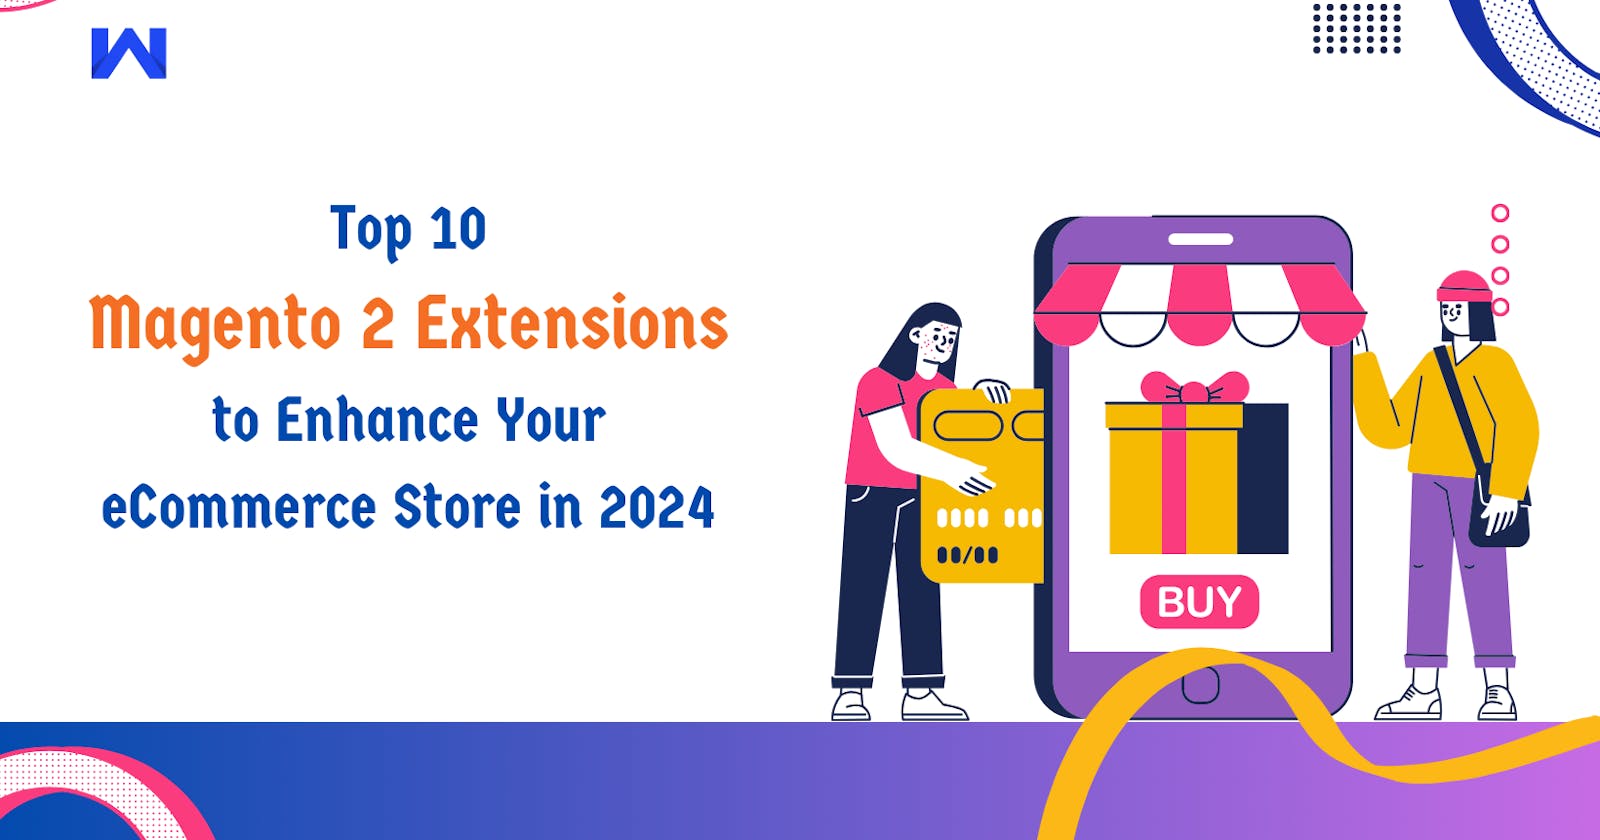 Top 10 Magento 2 Extensions to Enhance Your eCommerce Store in 2024